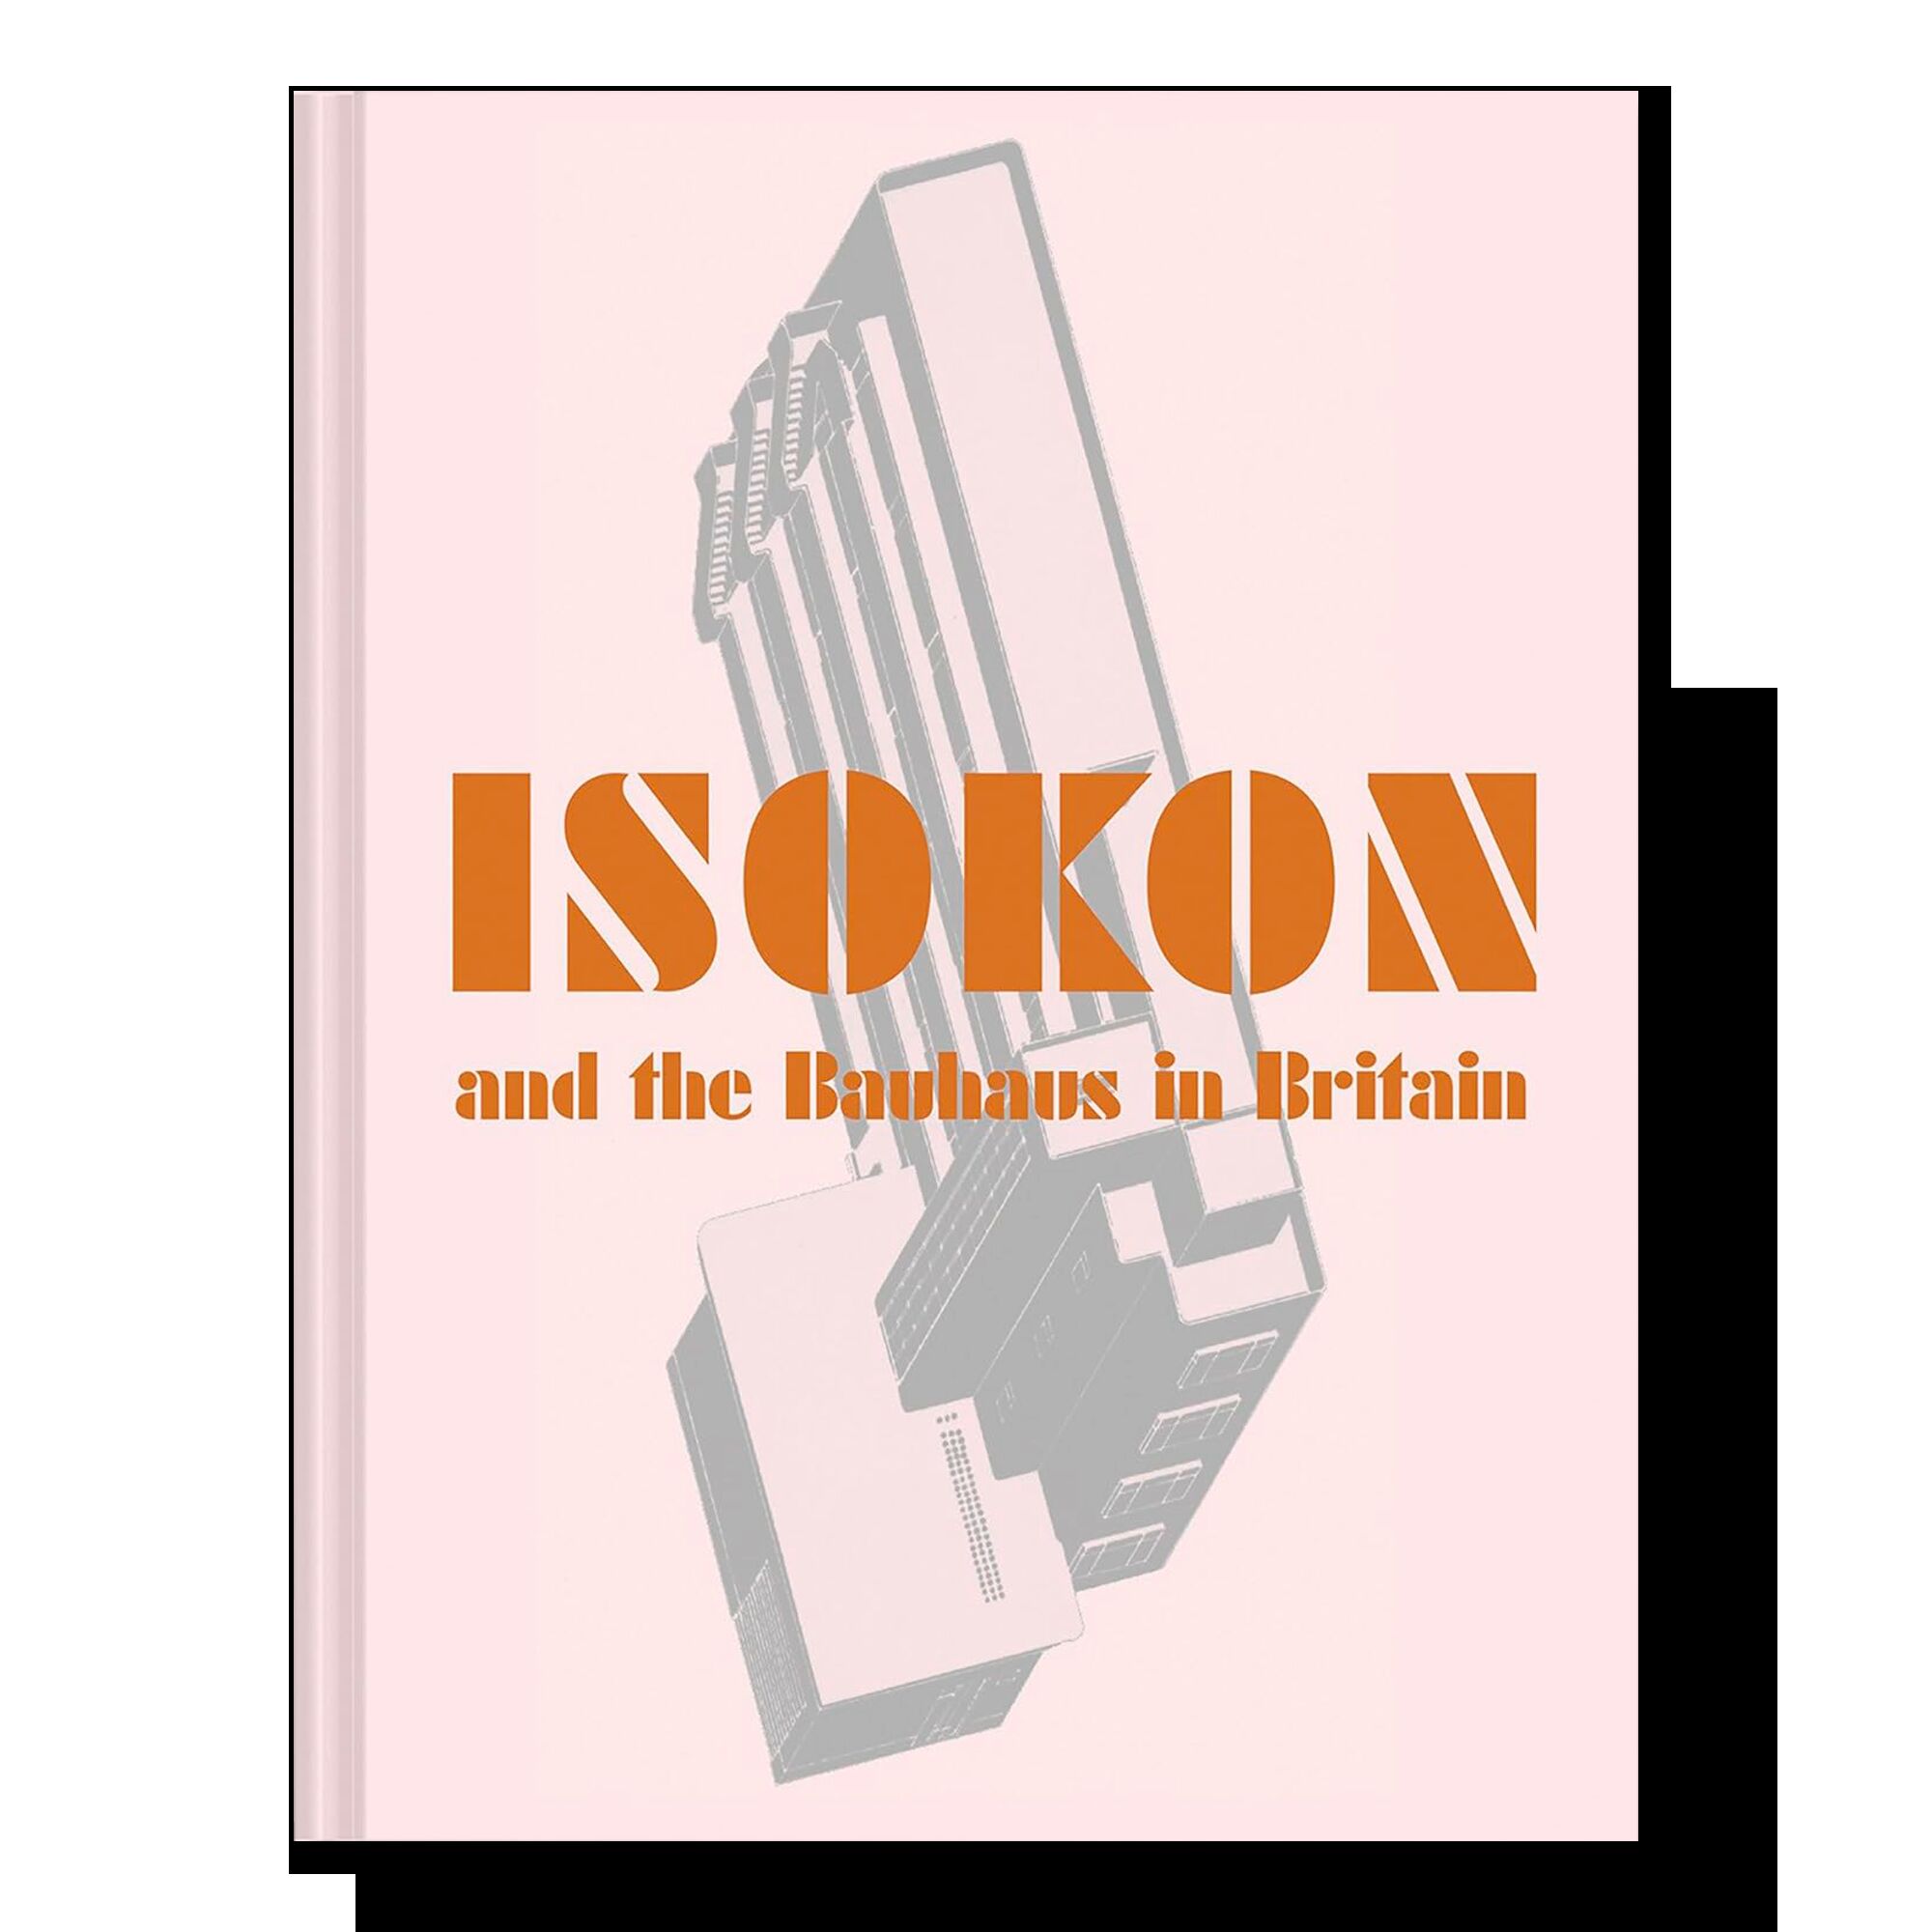 Isokon and the Bauhaus in Britain